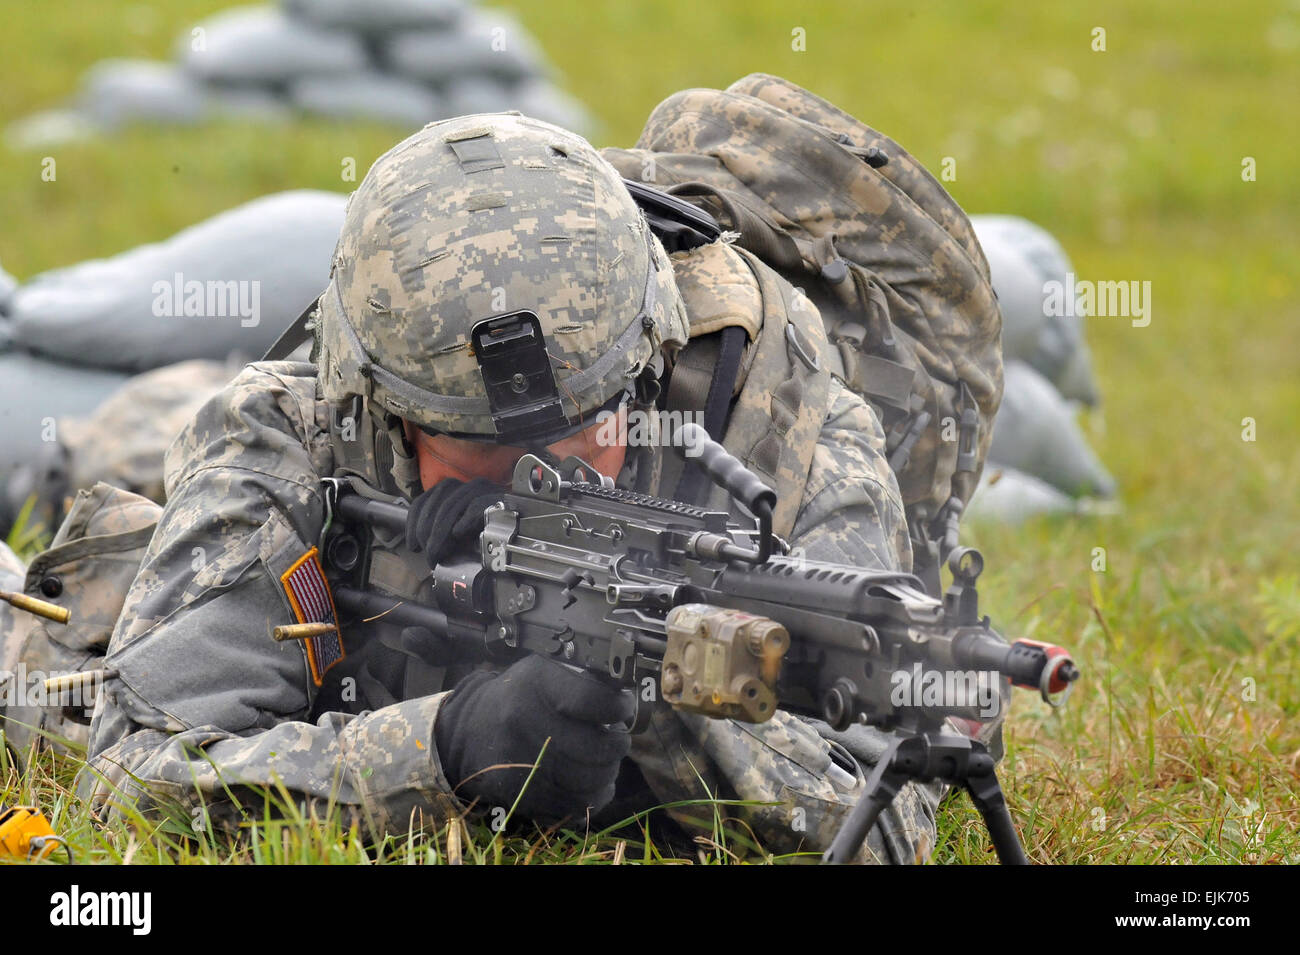 U.S. Army Spc.  Stabler, assigned to Joint Multinational Training Command, fires the M249 squad automated weapon during the Expert Infantryman Badge testing Aug. 27, 2012 at Grafenwoehr, Germany Training Area. Stock Photo